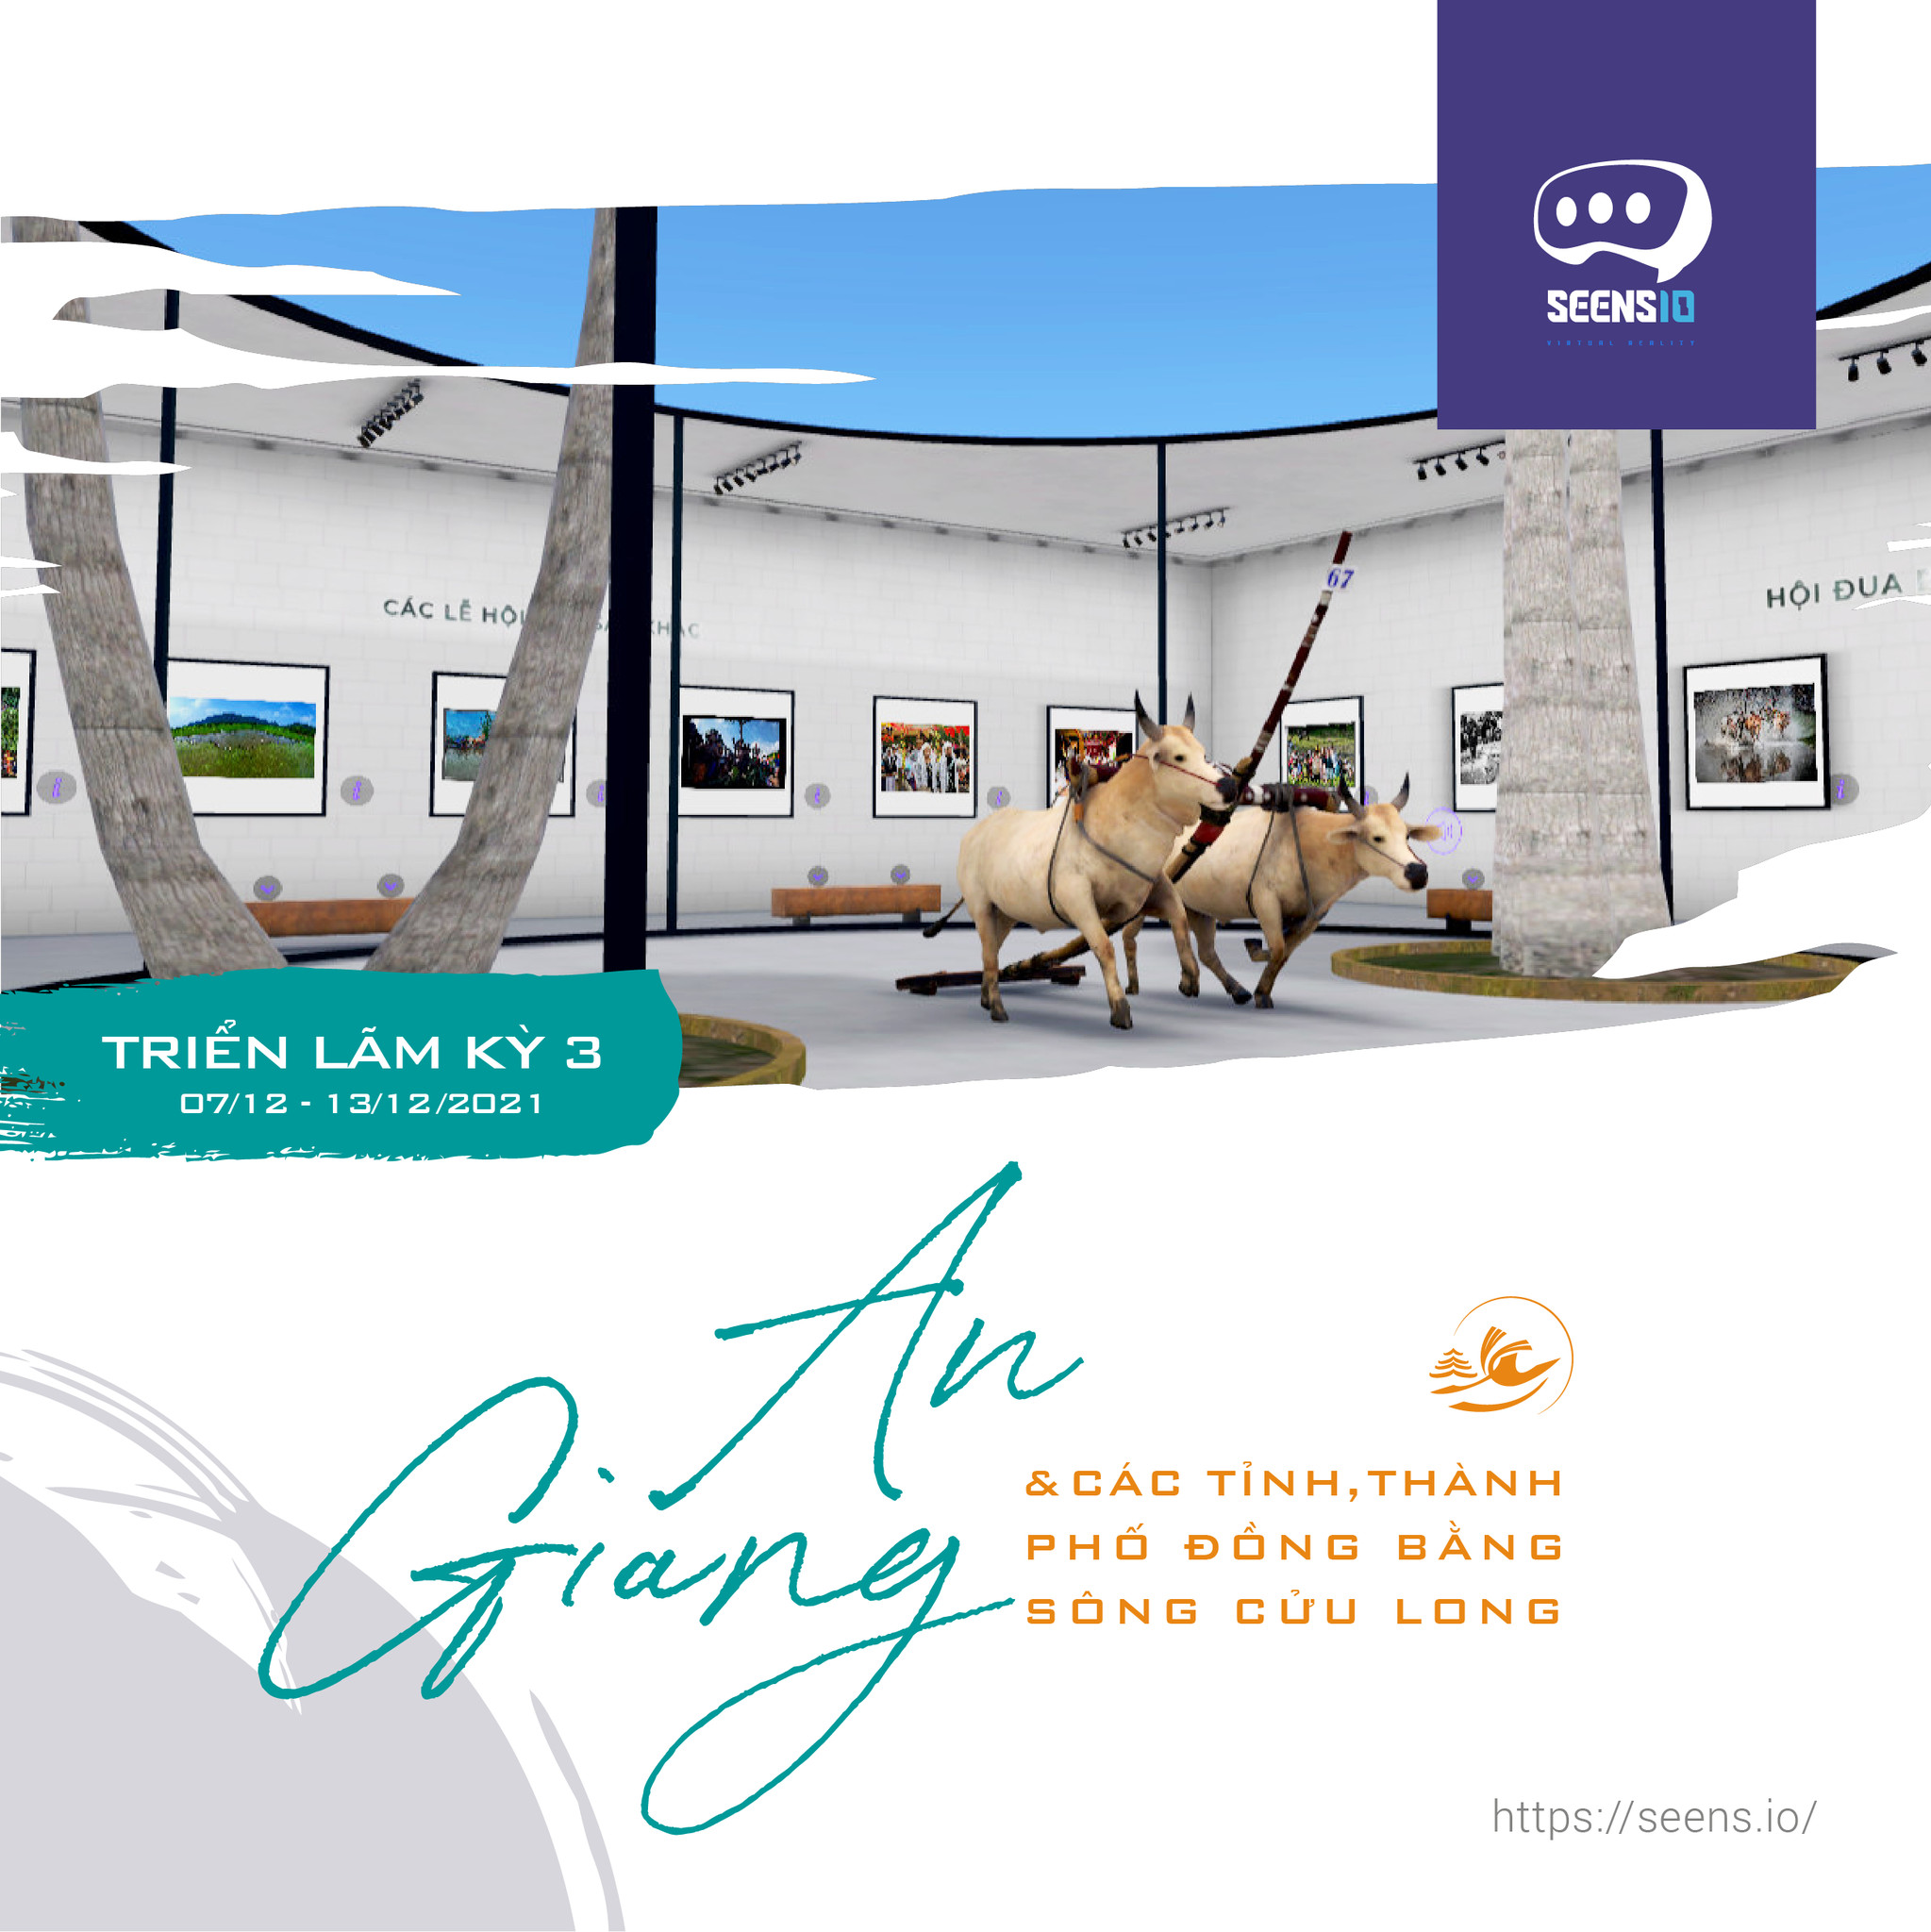 An Giang is about to launch the Mekong Delta tourism virtual reality exhibition